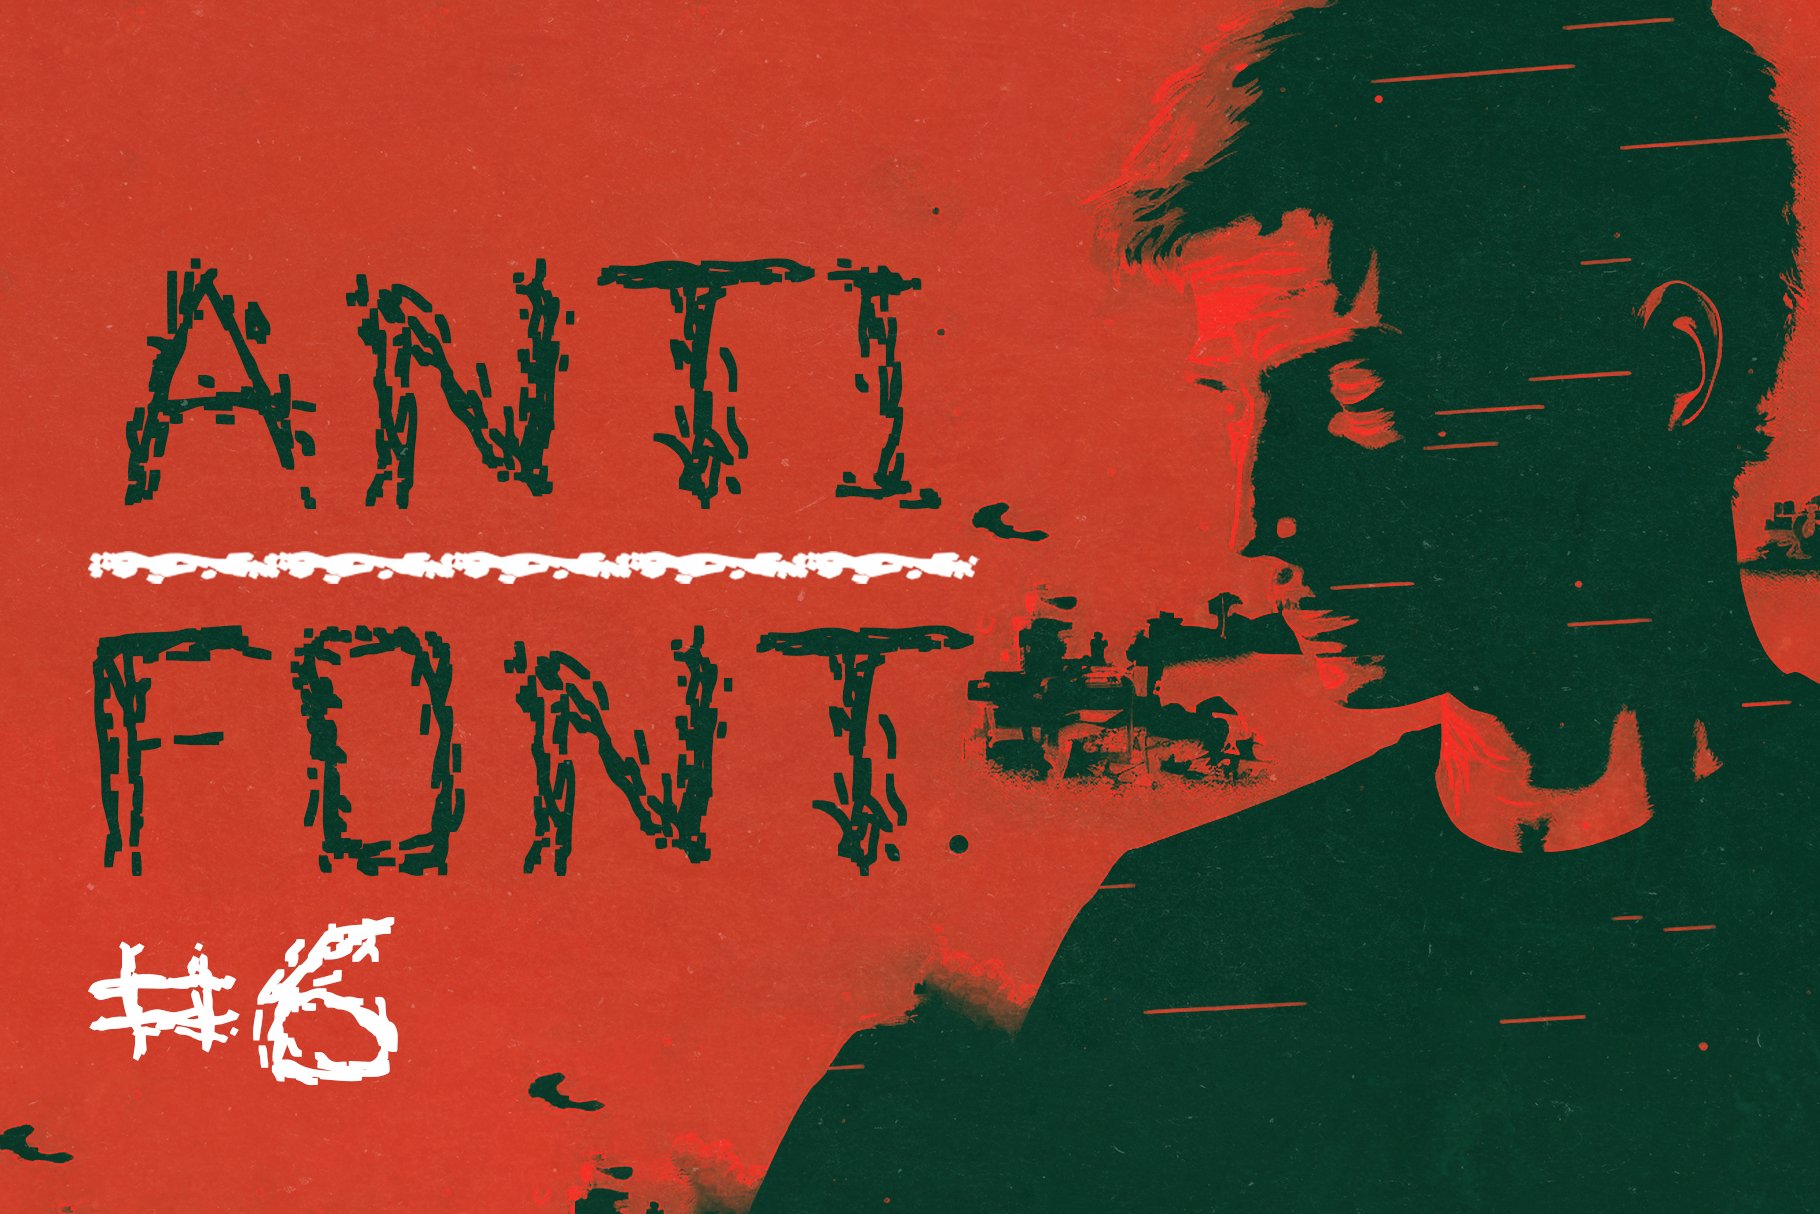 Anti-Font #6cover image.